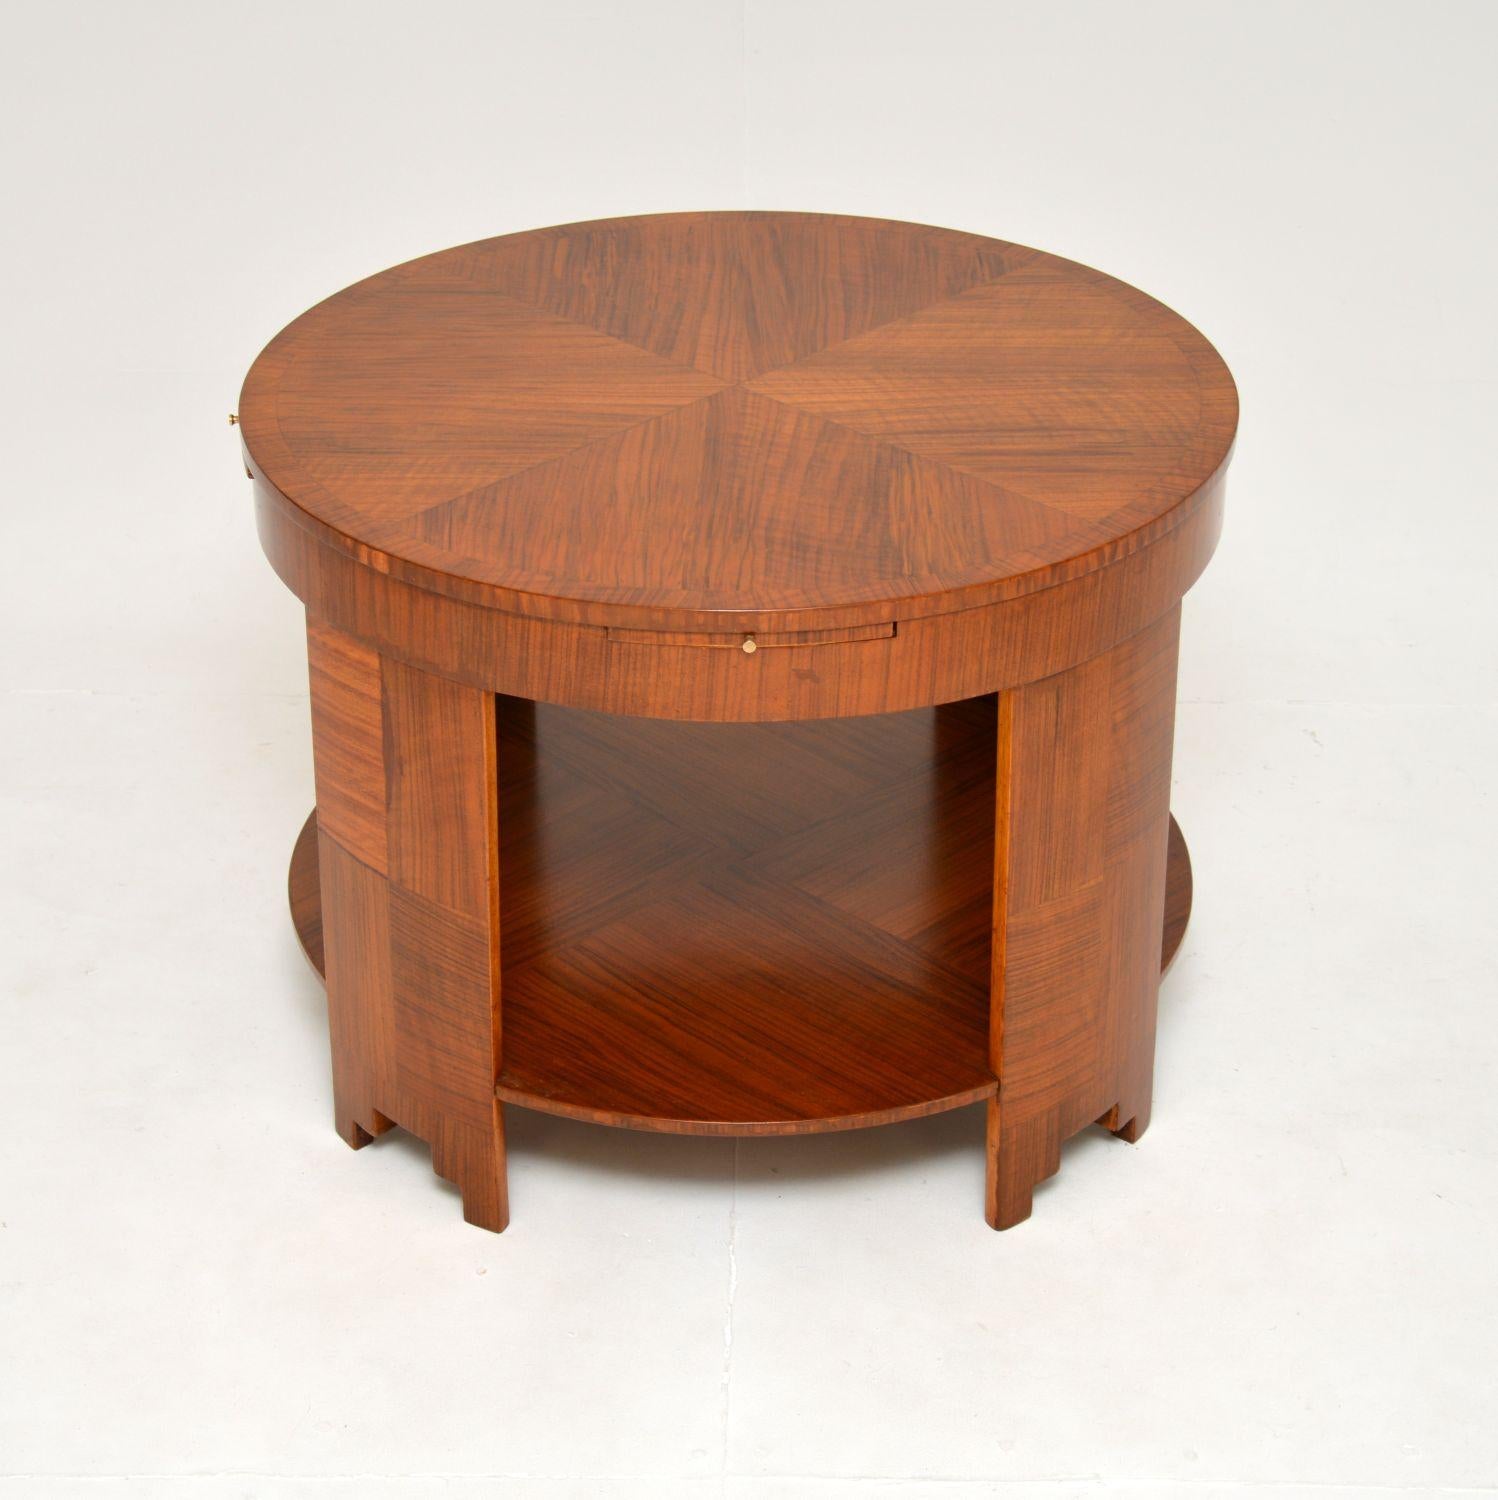 A stunning and large Art Deco walnut coffee table. This was made in England, it dates from the 1920’s.

It is of superb quality and is a most impressive size. The circular top has four brush slides that pull out from the edges with small brass